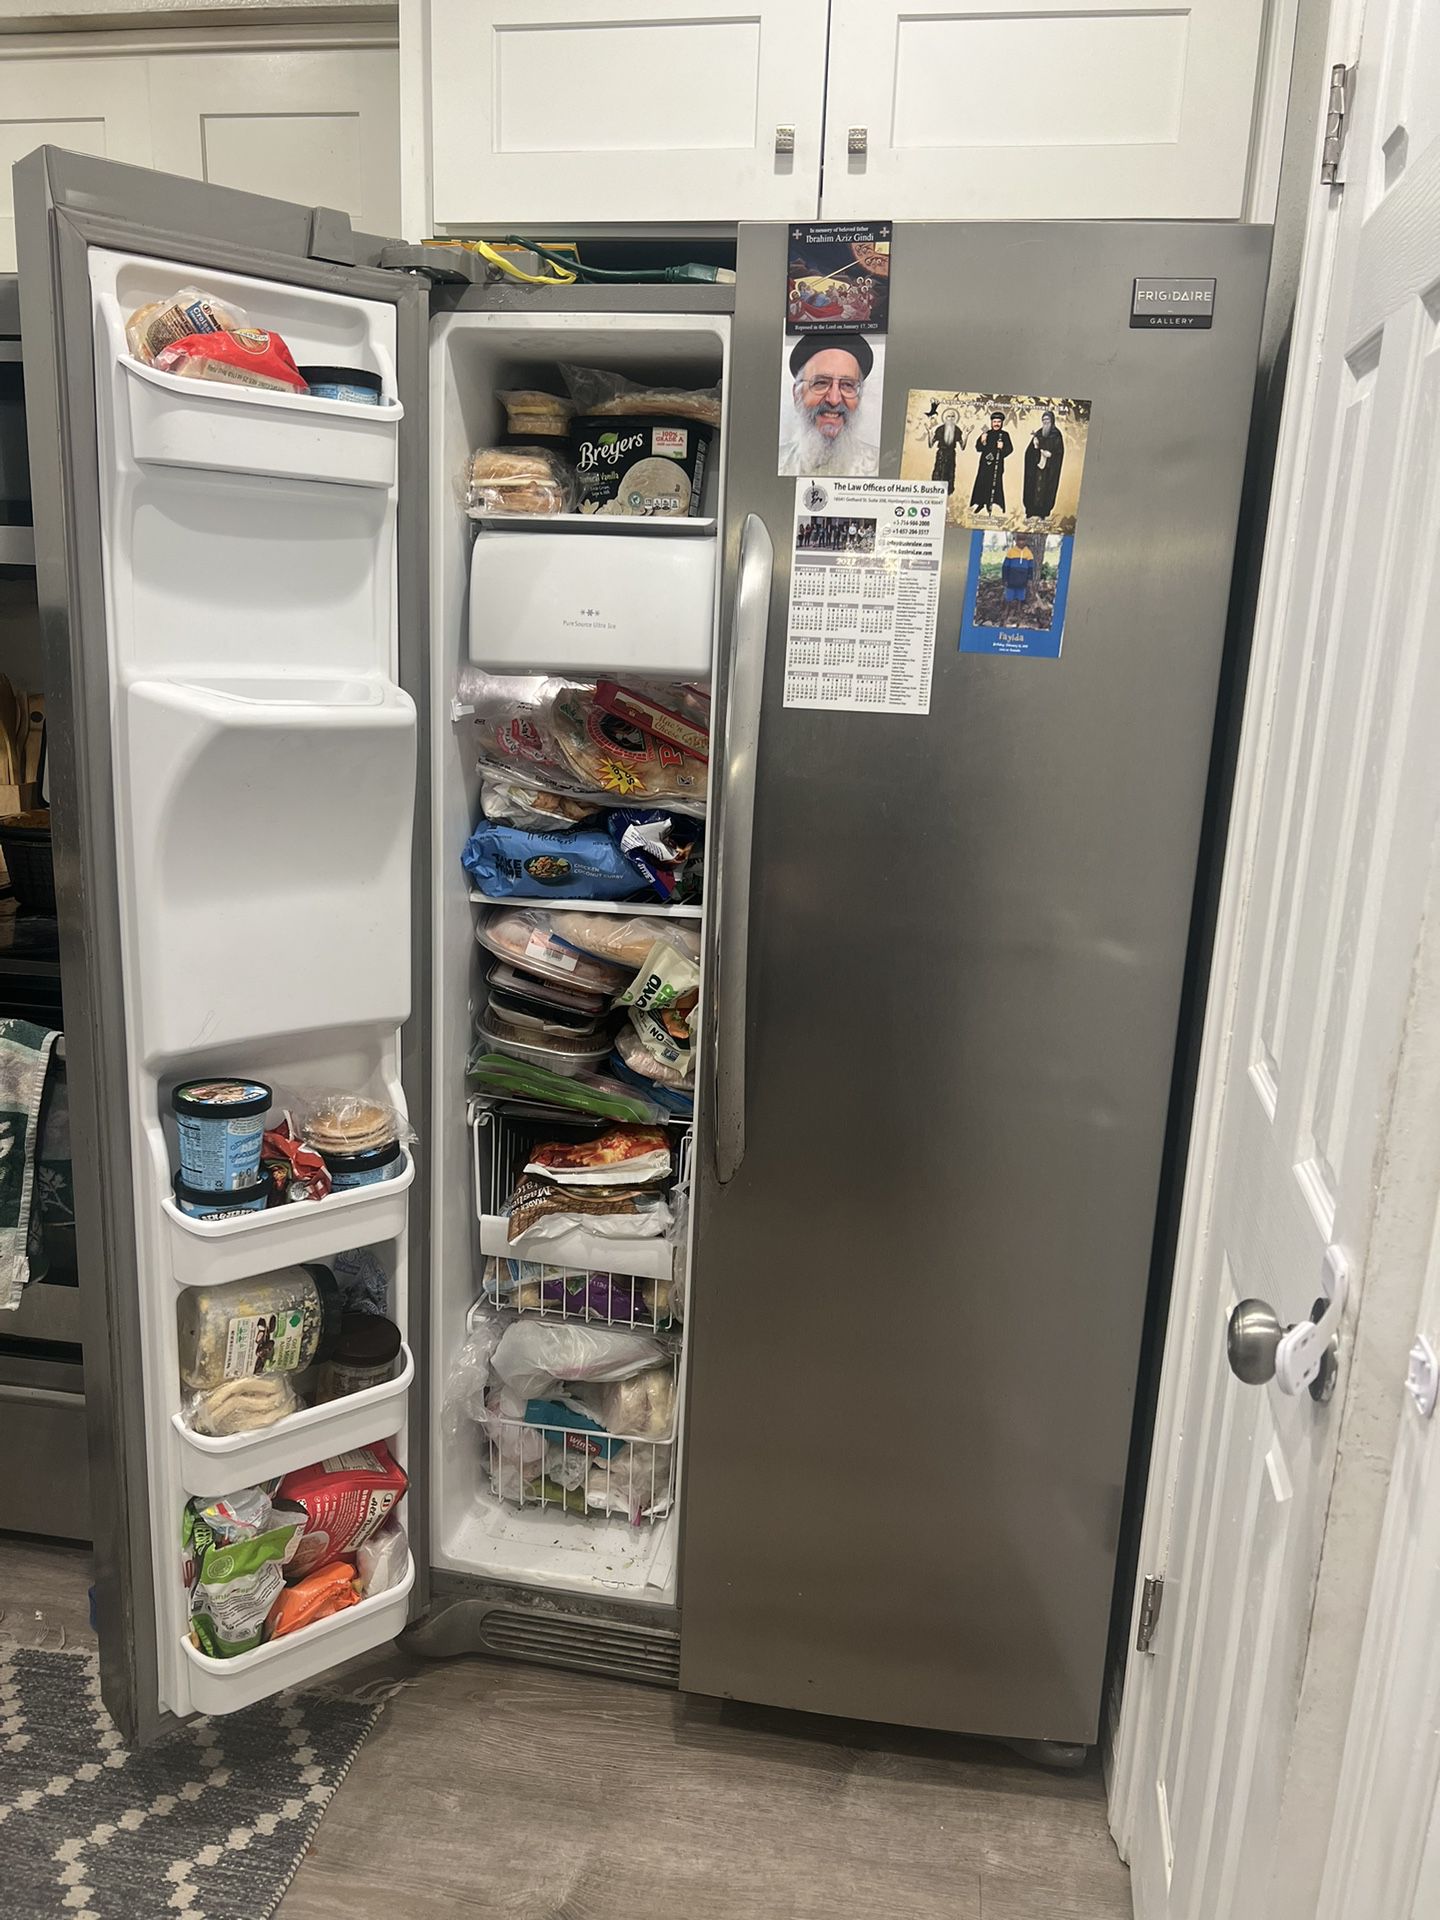 Frigidaire Side By Side Stainless Steel Fridge. Great condition for just $255